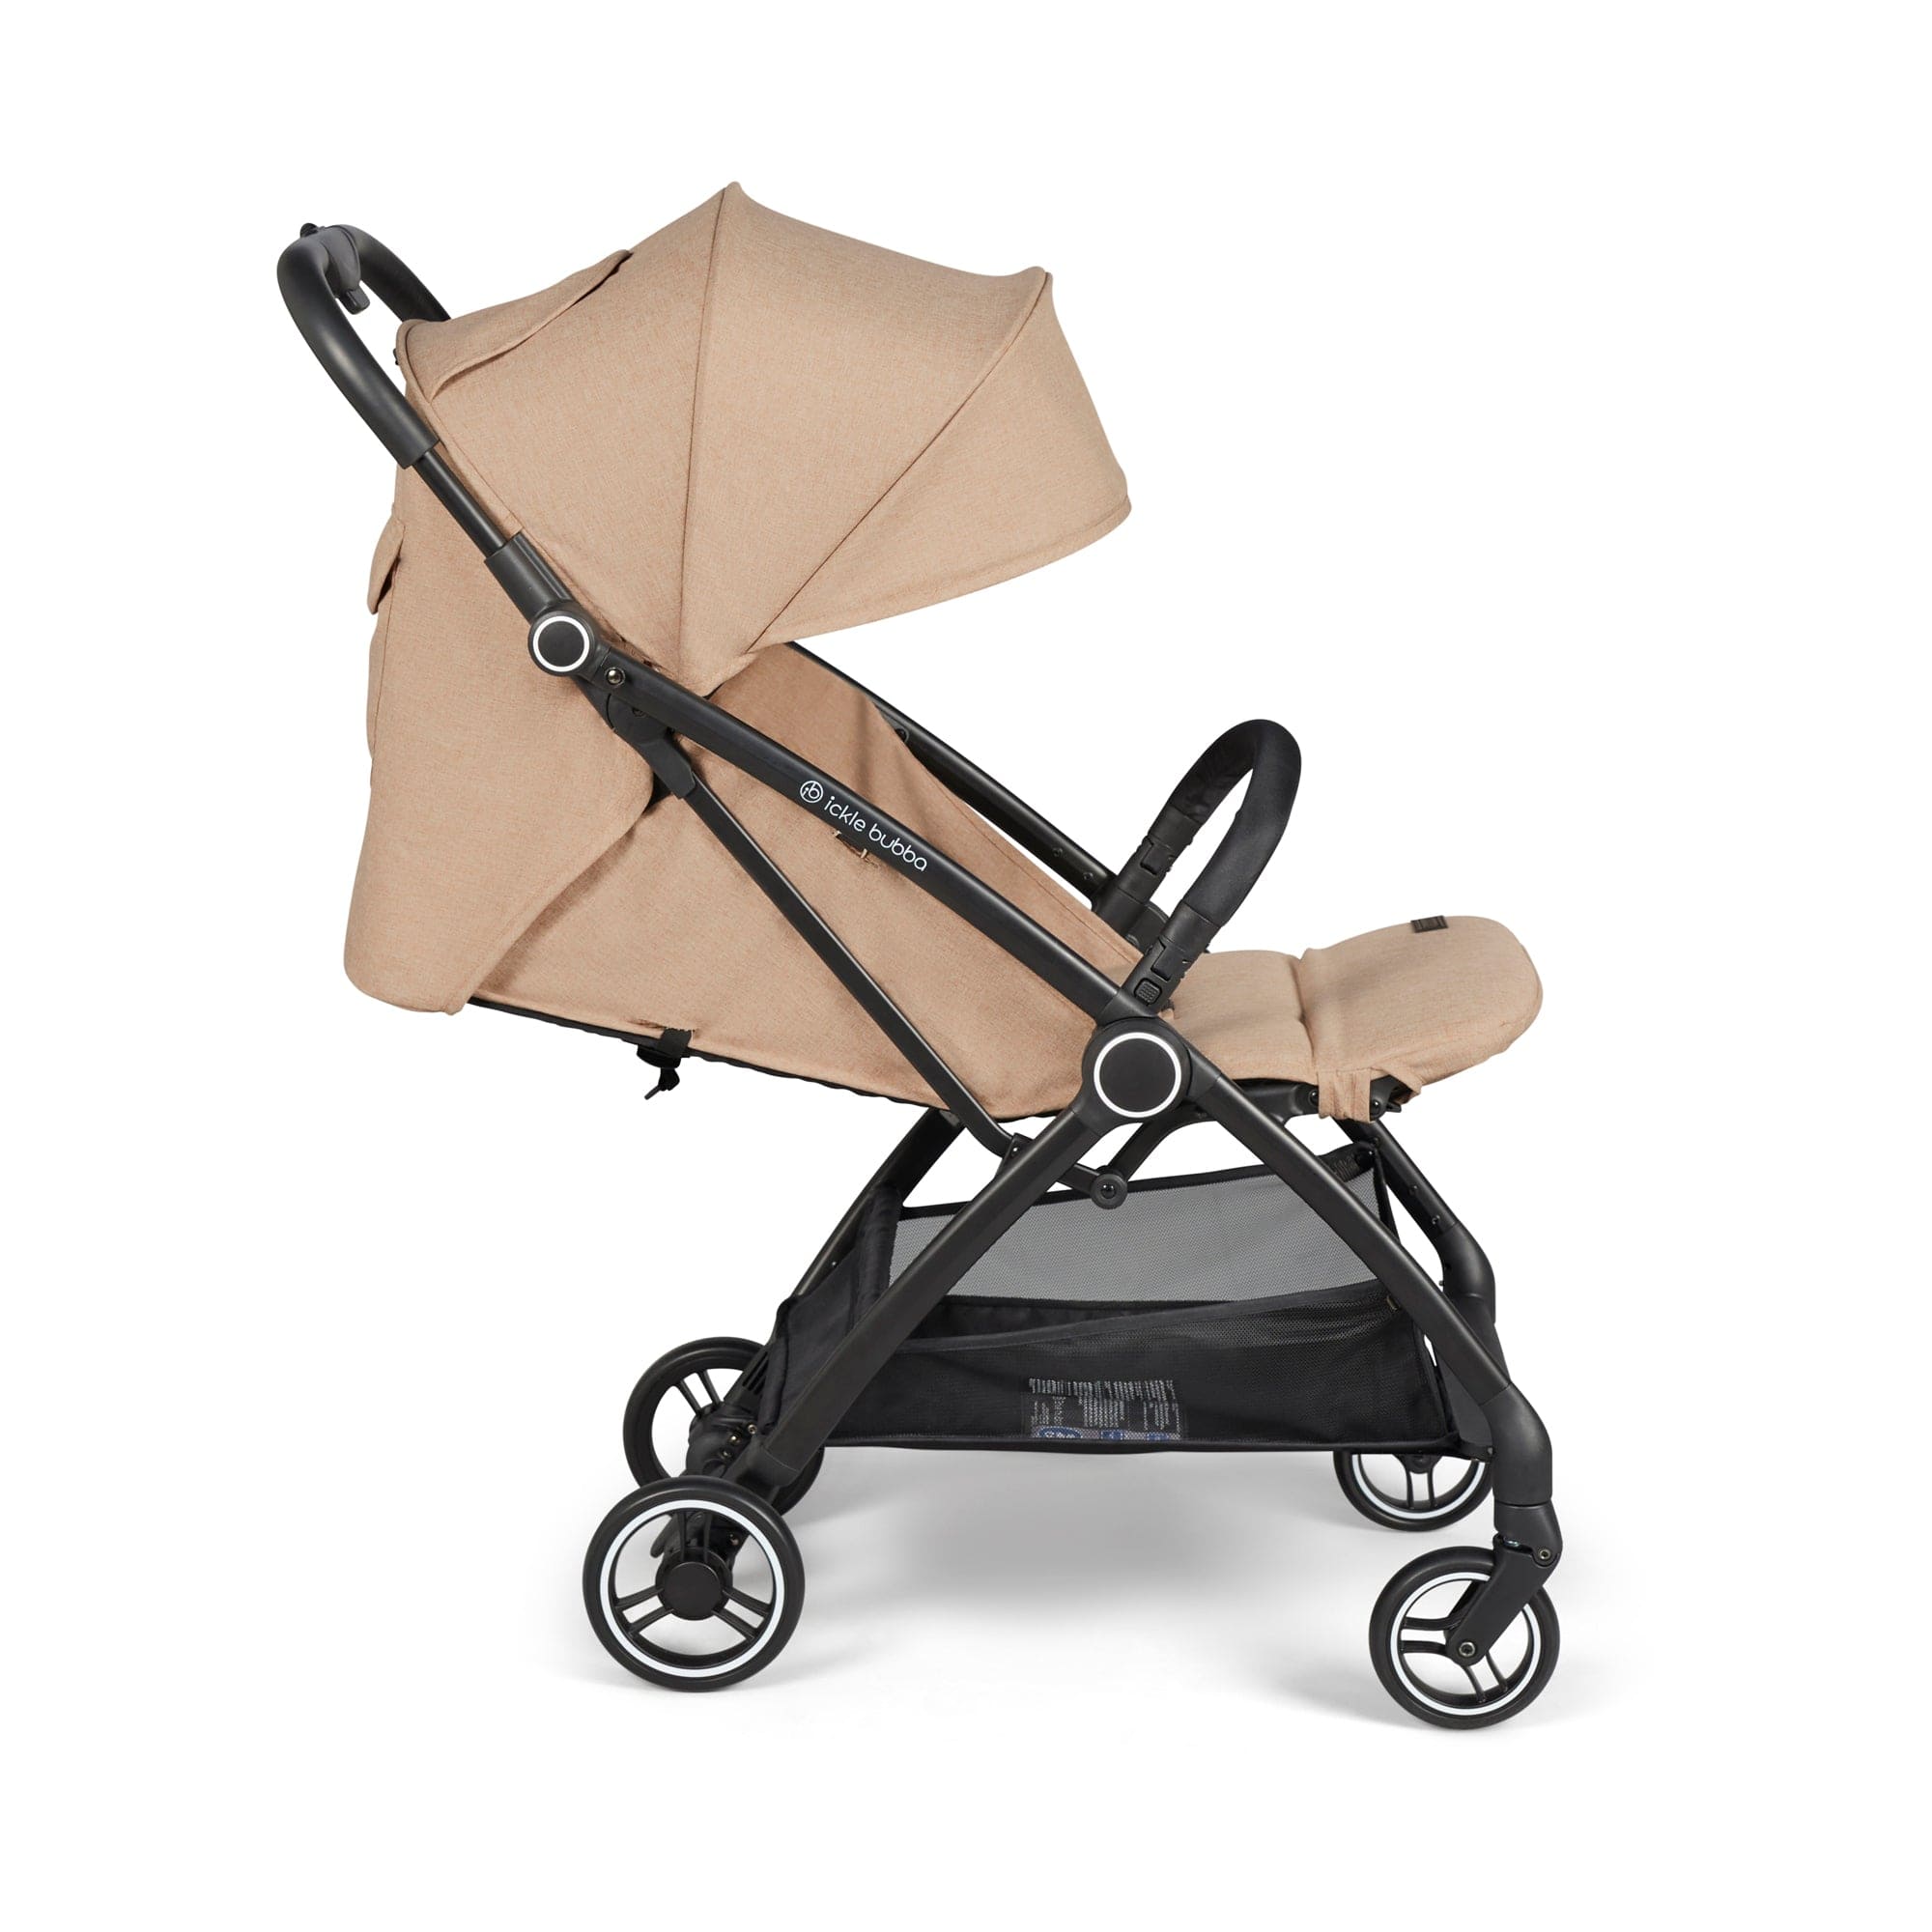 Ickle Bubba baby pushchairs Ickle Bubba Aries Autofold Stroller in Biscuit 15-005-100-157